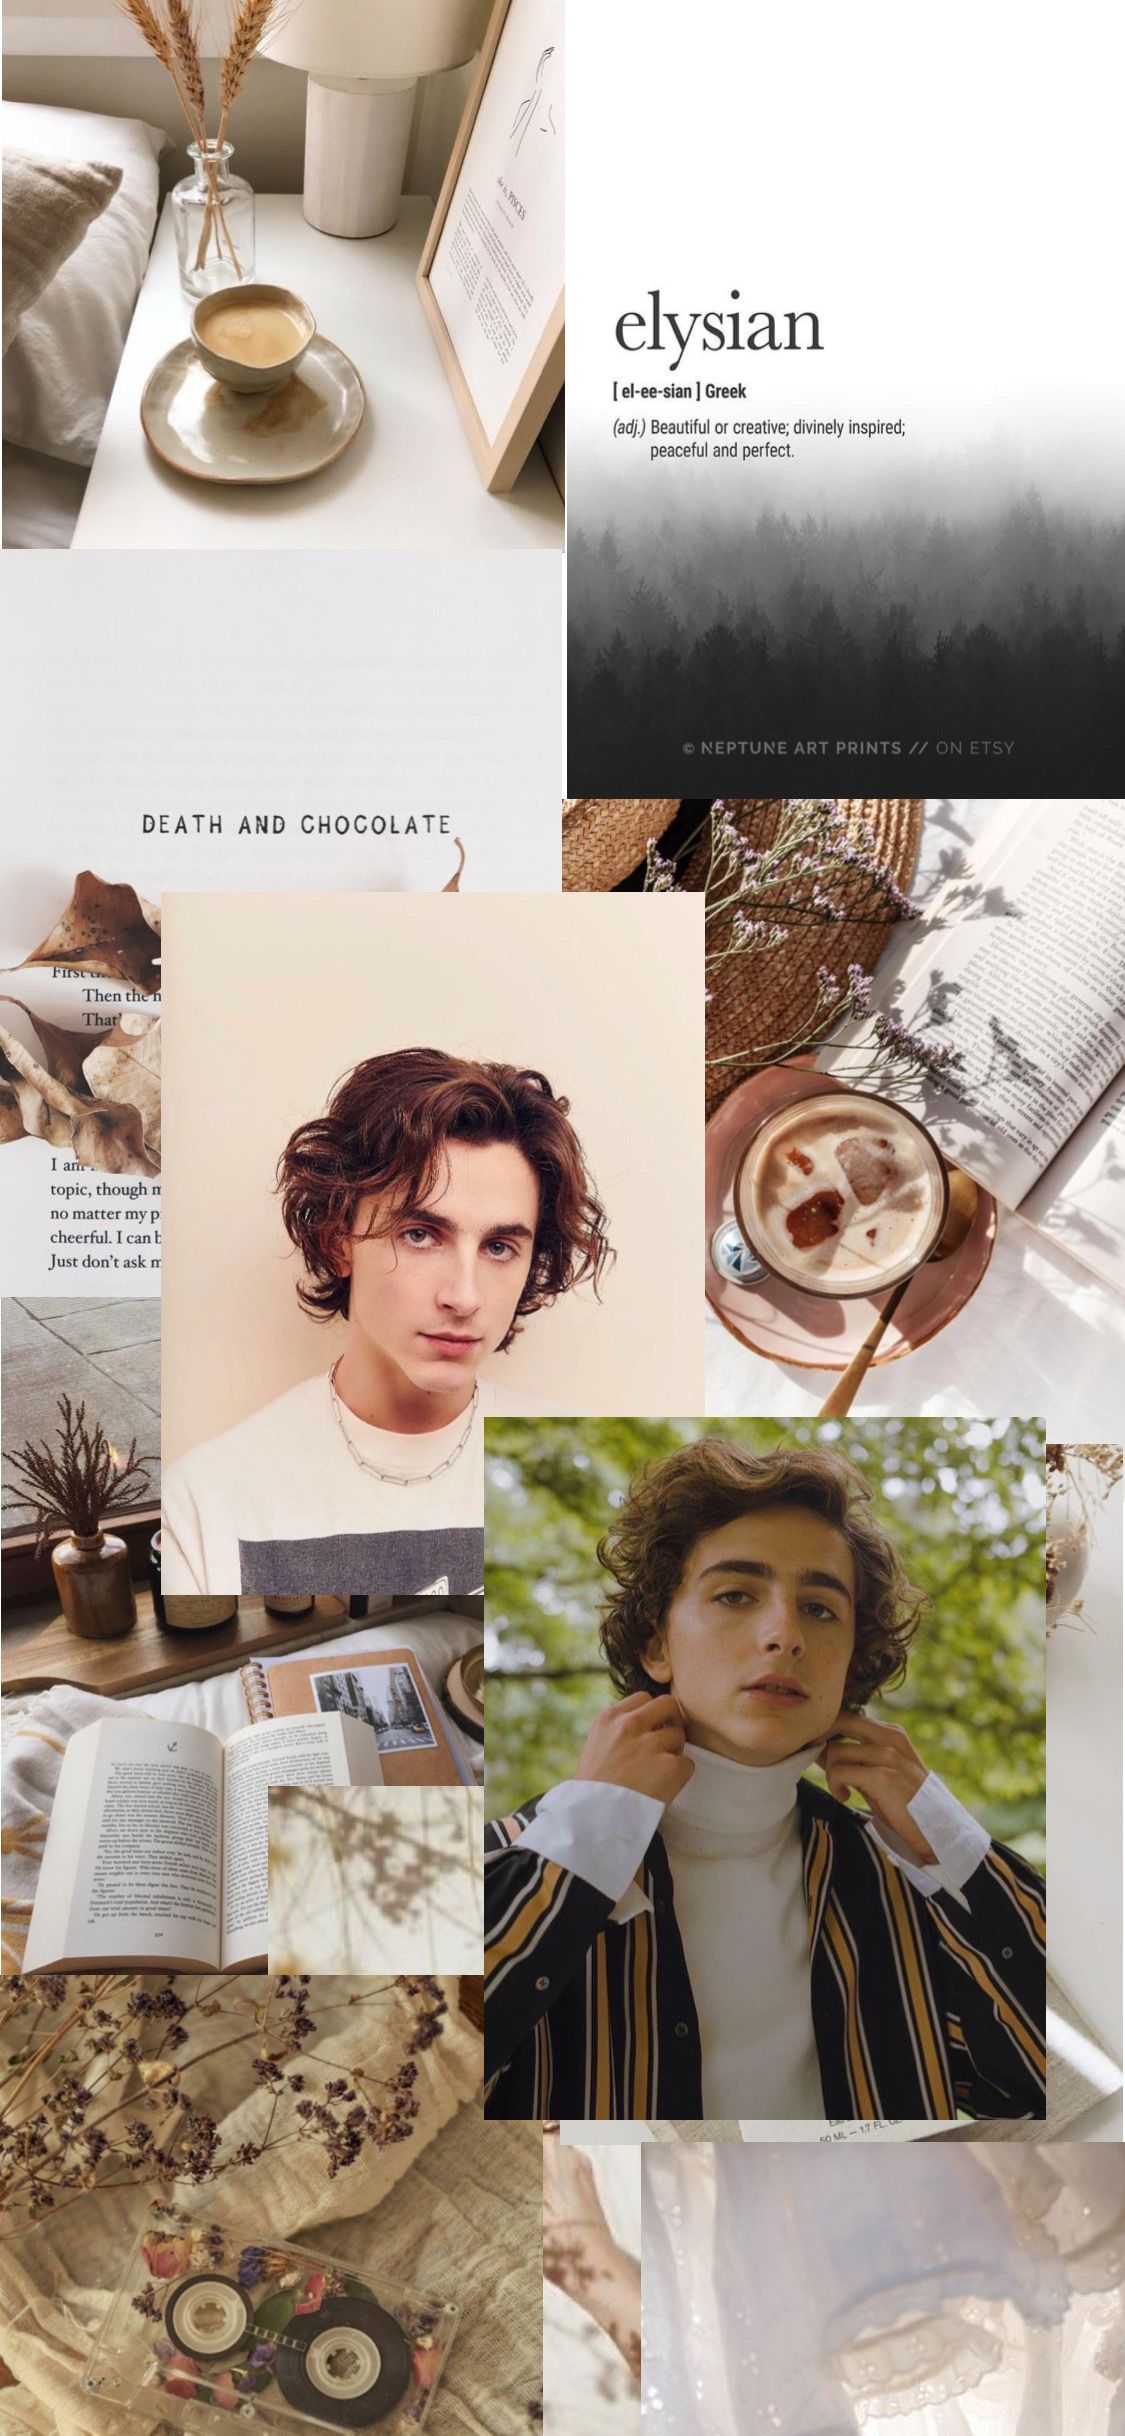 Moodboard featuring Timothee Chalamet, a book, a cup of coffee, and a plant. - Timothee Chalamet